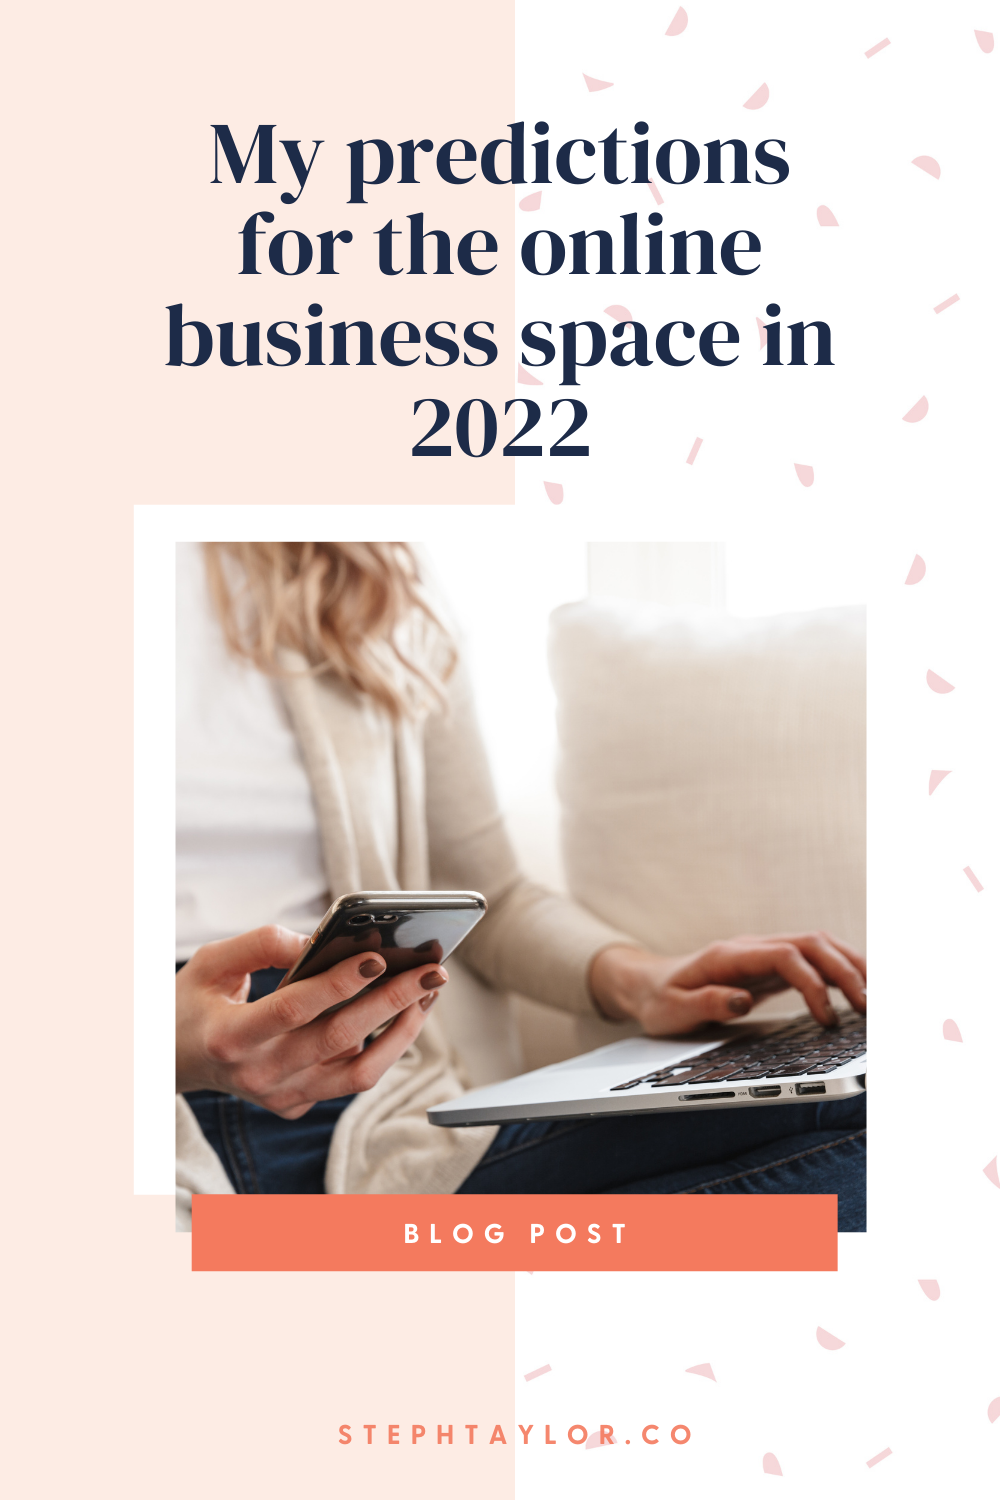 My predictions for the online business space in 2022